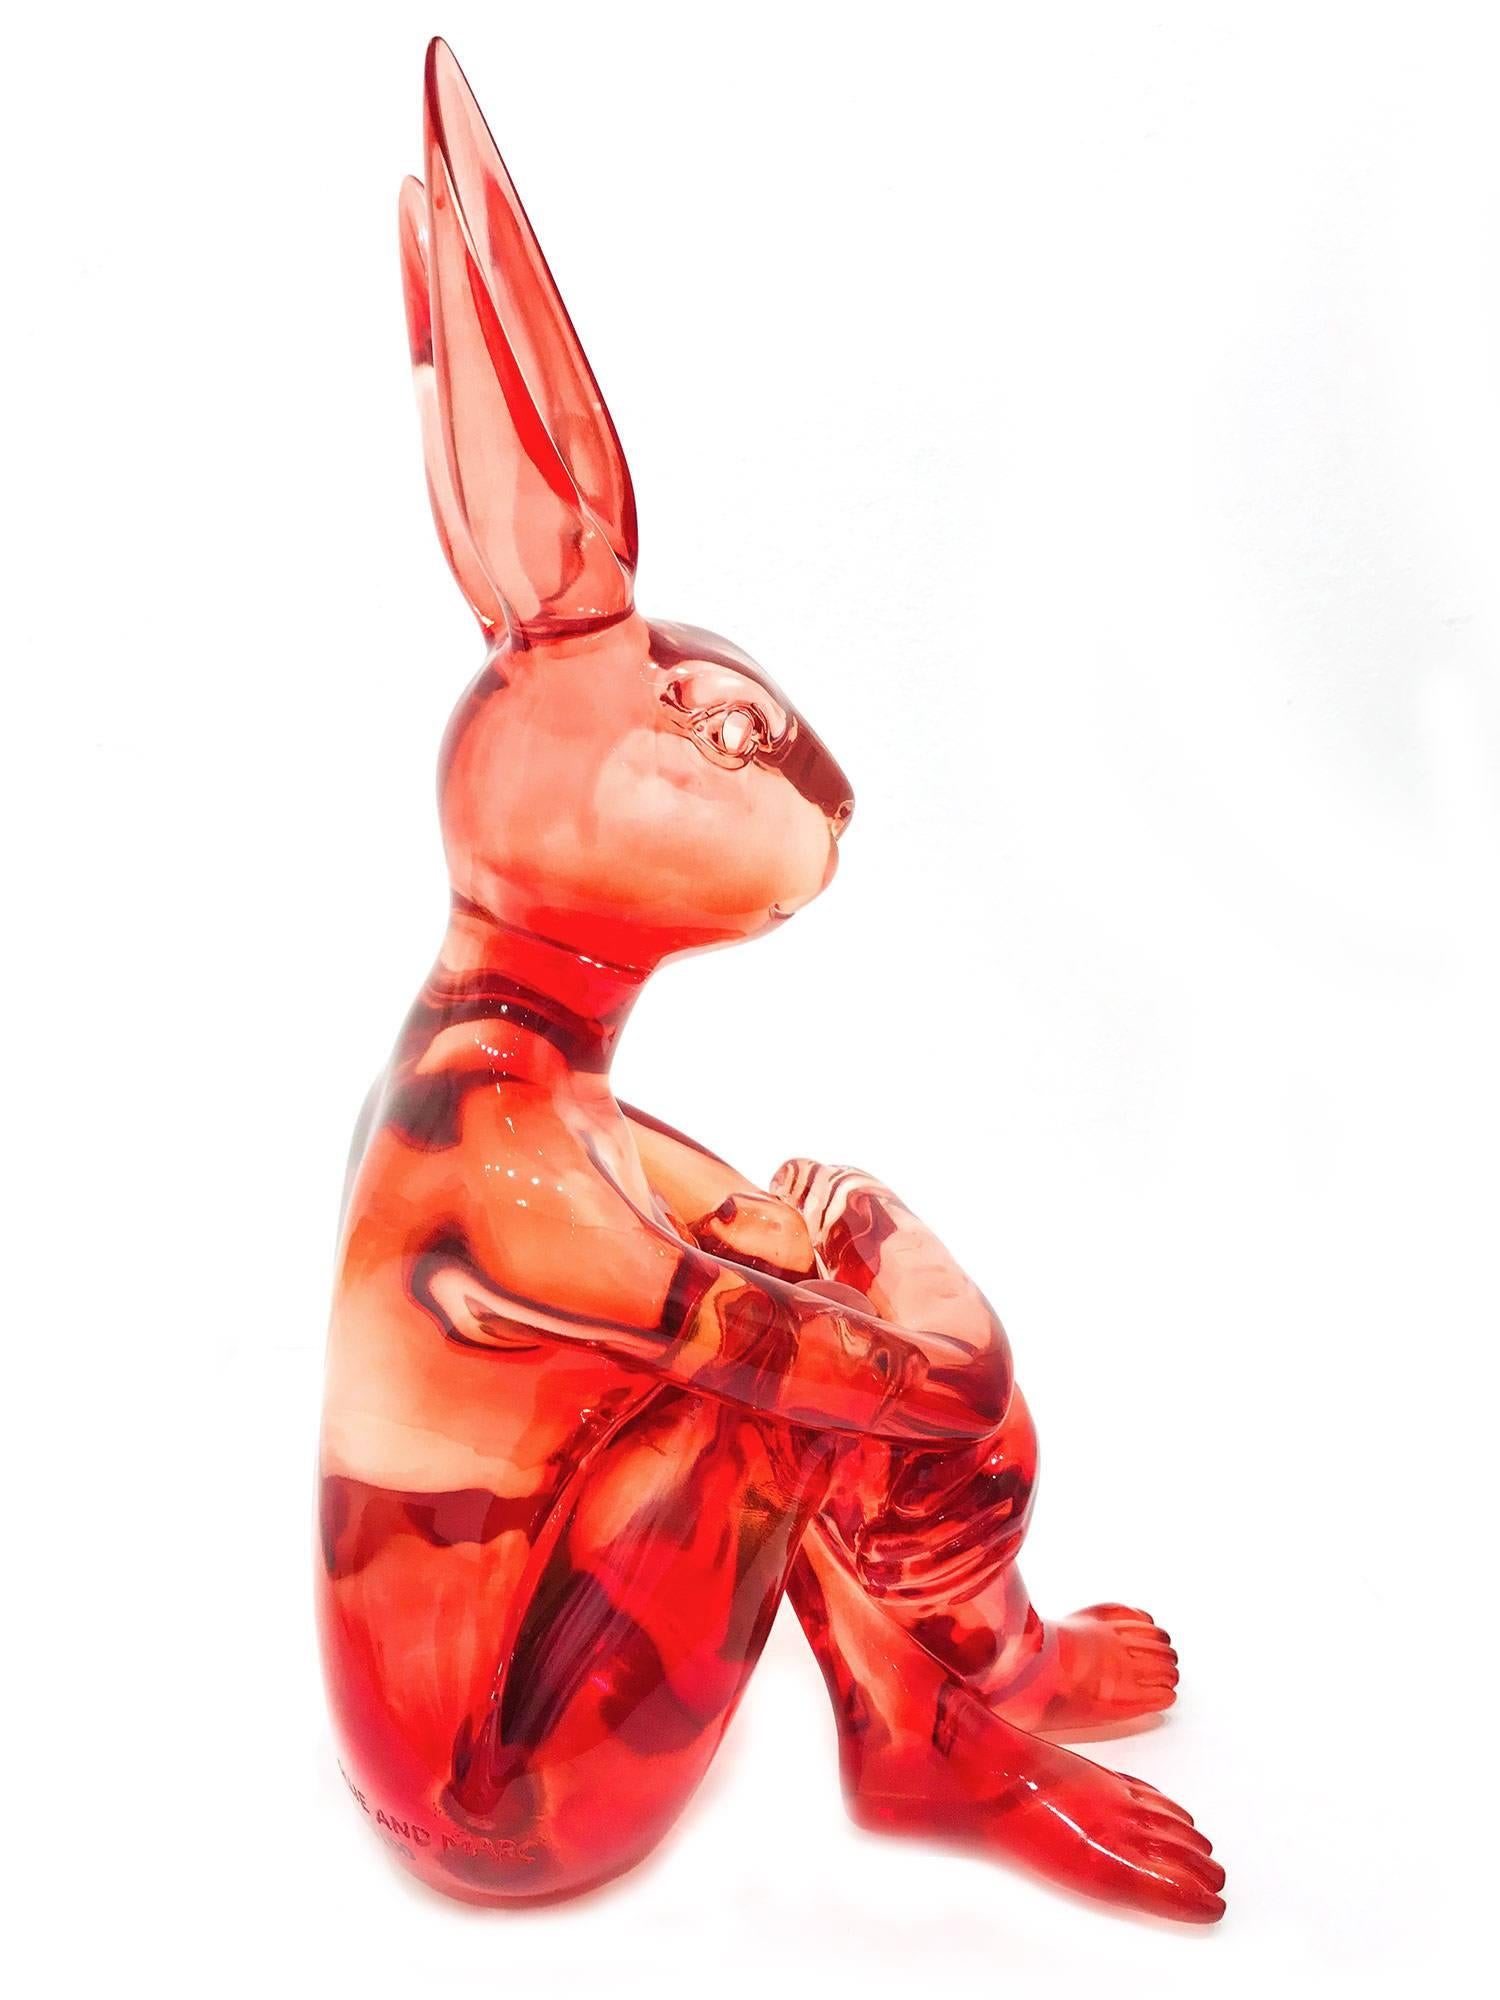 A whimsical yet very strong piece depicting the Rabbit Girl from Gillie and Marc's iconic figures of the Dog/Bunny Human Hybrid, which has picked up much esteem across the globe. Here we find Rabbit Girl sitting crossed legged in a bright and fun